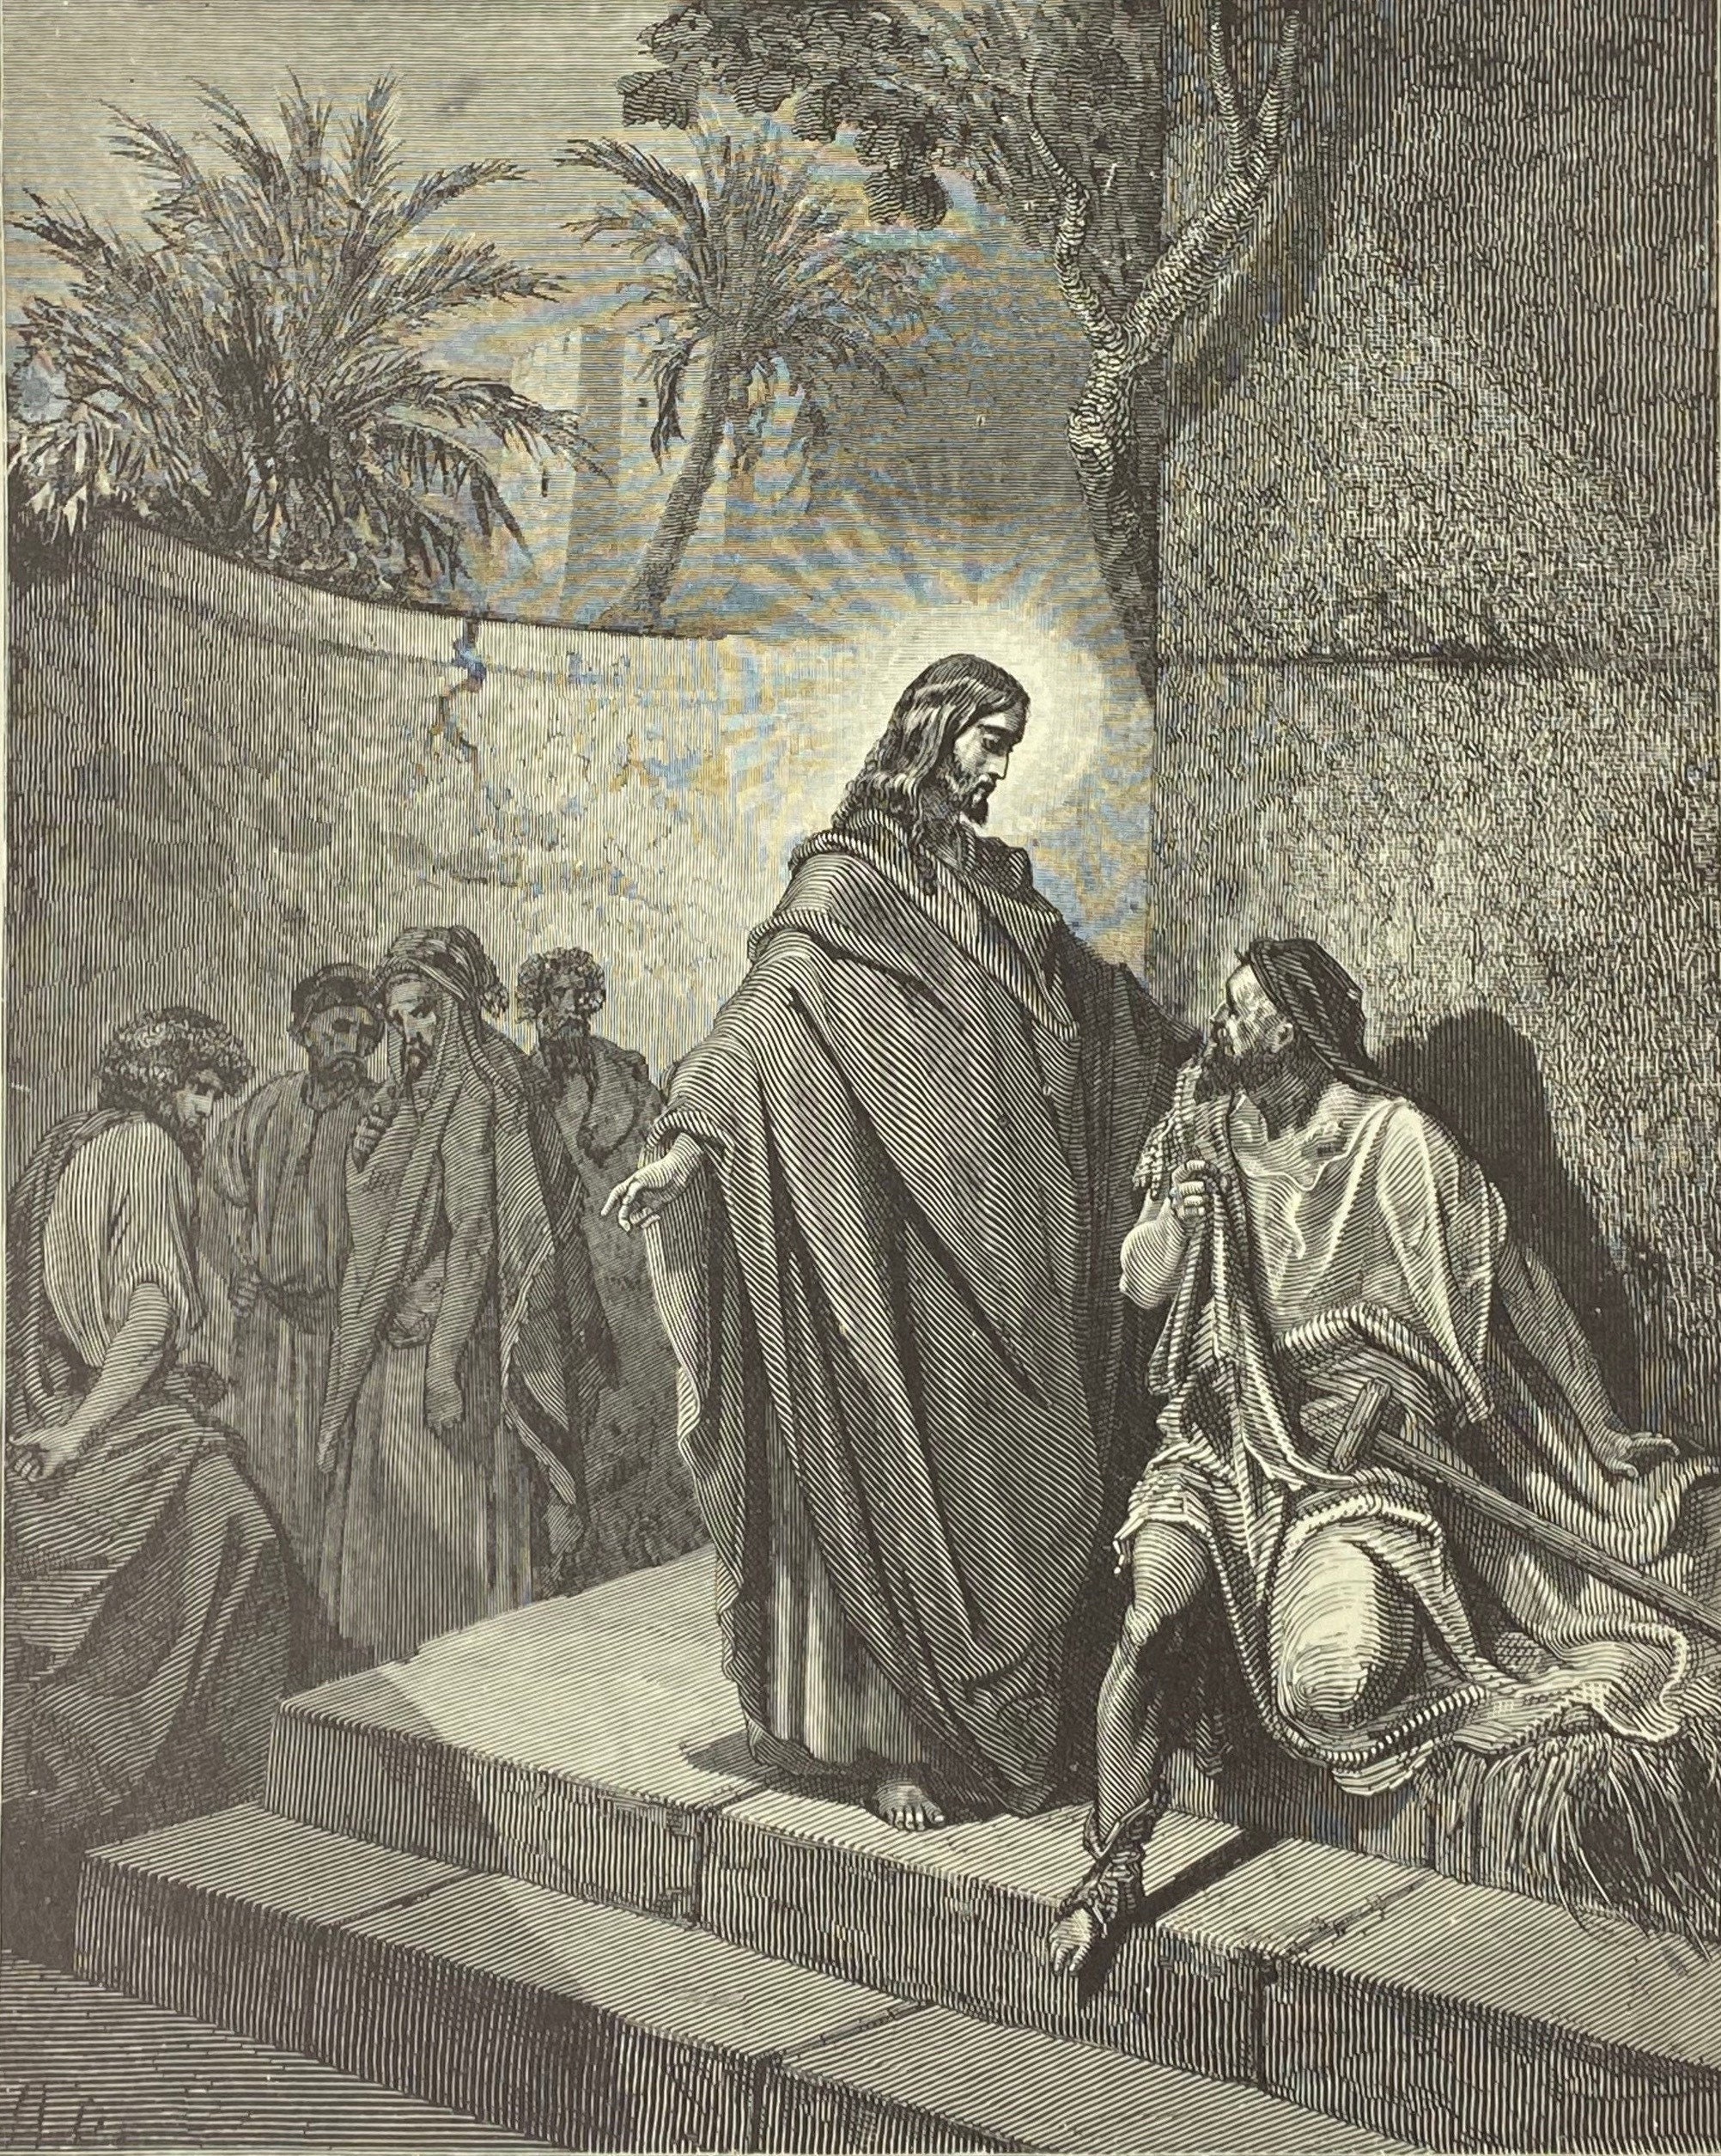 Jesus Healing the Sick Man of the Palsy by Gustave Dore - Etsy UK